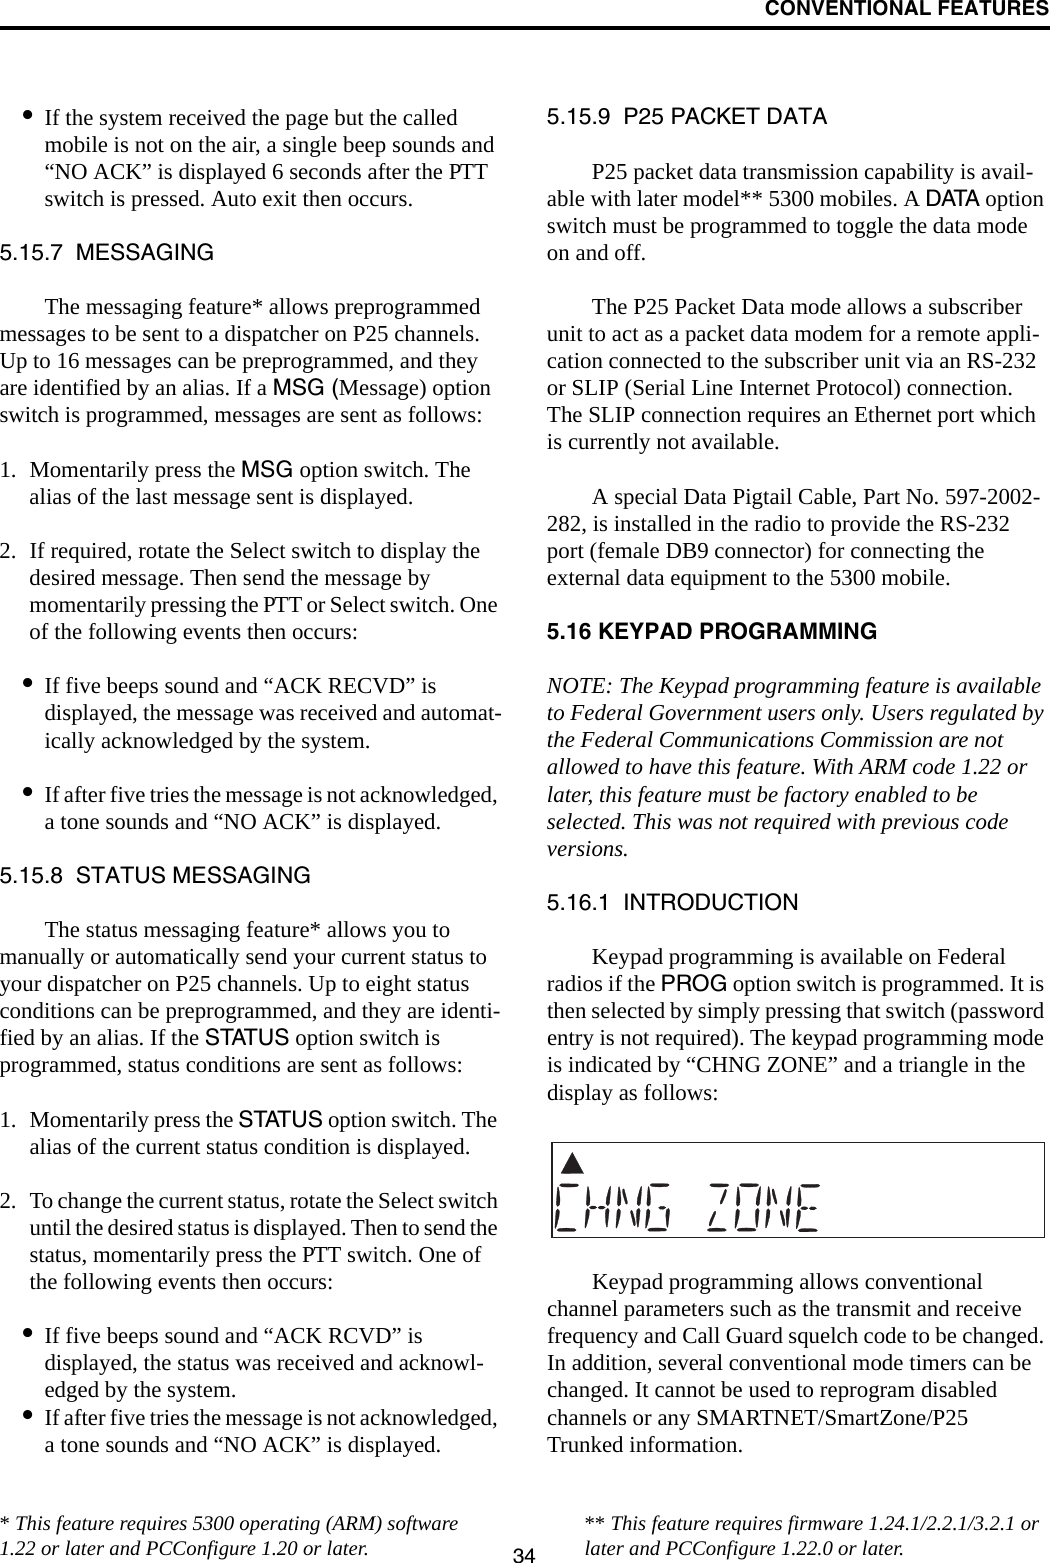 CONVENTIONAL FEATURES34•If the system received the page but the called mobile is not on the air, a single beep sounds and “NO ACK” is displayed 6 seconds after the PTT switch is pressed. Auto exit then occurs.5.15.7  MESSAGINGThe messaging feature* allows preprogrammed messages to be sent to a dispatcher on P25 channels. Up to 16 messages can be preprogrammed, and they are identified by an alias. If a MSG (Message) option switch is programmed, messages are sent as follows:1. Momentarily press the MSG option switch. The alias of the last message sent is displayed.2. If required, rotate the Select switch to display the desired message. Then send the message by momentarily pressing the PTT or Select switch. One of the following events then occurs:•If five beeps sound and “ACK RECVD” is displayed, the message was received and automat-ically acknowledged by the system.•If after five tries the message is not acknowledged, a tone sounds and “NO ACK” is displayed. 5.15.8  STATUS MESSAGINGThe status messaging feature* allows you to manually or automatically send your current status to your dispatcher on P25 channels. Up to eight status conditions can be preprogrammed, and they are identi-fied by an alias. If the STATUS option switch is programmed, status conditions are sent as follows:1. Momentarily press the STATUS option switch. The alias of the current status condition is displayed.2. To change the current status, rotate the Select switch until the desired status is displayed. Then to send the status, momentarily press the PTT switch. One of the following events then occurs:•If five beeps sound and “ACK RCVD” is displayed, the status was received and acknowl-edged by the system.•If after five tries the message is not acknowledged, a tone sounds and “NO ACK” is displayed. 5.15.9  P25 PACKET DATAP25 packet data transmission capability is avail-able with later model** 5300 mobiles. A DATA option switch must be programmed to toggle the data mode on and off. The P25 Packet Data mode allows a subscriber unit to act as a packet data modem for a remote appli-cation connected to the subscriber unit via an RS-232 or SLIP (Serial Line Internet Protocol) connection. The SLIP connection requires an Ethernet port which is currently not available.A special Data Pigtail Cable, Part No. 597-2002-282, is installed in the radio to provide the RS-232 port (female DB9 connector) for connecting the external data equipment to the 5300 mobile. 5.16 KEYPAD PROGRAMMINGNOTE: The Keypad programming feature is available to Federal Government users only. Users regulated by the Federal Communications Commission are not allowed to have this feature. With ARM code 1.22 or later, this feature must be factory enabled to be selected. This was not required with previous code versions.5.16.1  INTRODUCTIONKeypad programming is available on Federal radios if the PROG option switch is programmed. It is then selected by simply pressing that switch (password entry is not required). The keypad programming mode is indicated by “CHNG ZONE” and a triangle in the display as follows:Keypad programming allows conventional channel parameters such as the transmit and receive frequency and Call Guard squelch code to be changed. In addition, several conventional mode timers can be changed. It cannot be used to reprogram disabled channels or any SMARTNET/SmartZone/P25 Trunked information.* This feature requires 5300 operating (ARM) software 1.22 or later and PCConfigure 1.20 or later. ** This feature requires firmware 1.24.1/2.2.1/3.2.1 or later and PCConfigure 1.22.0 or later.